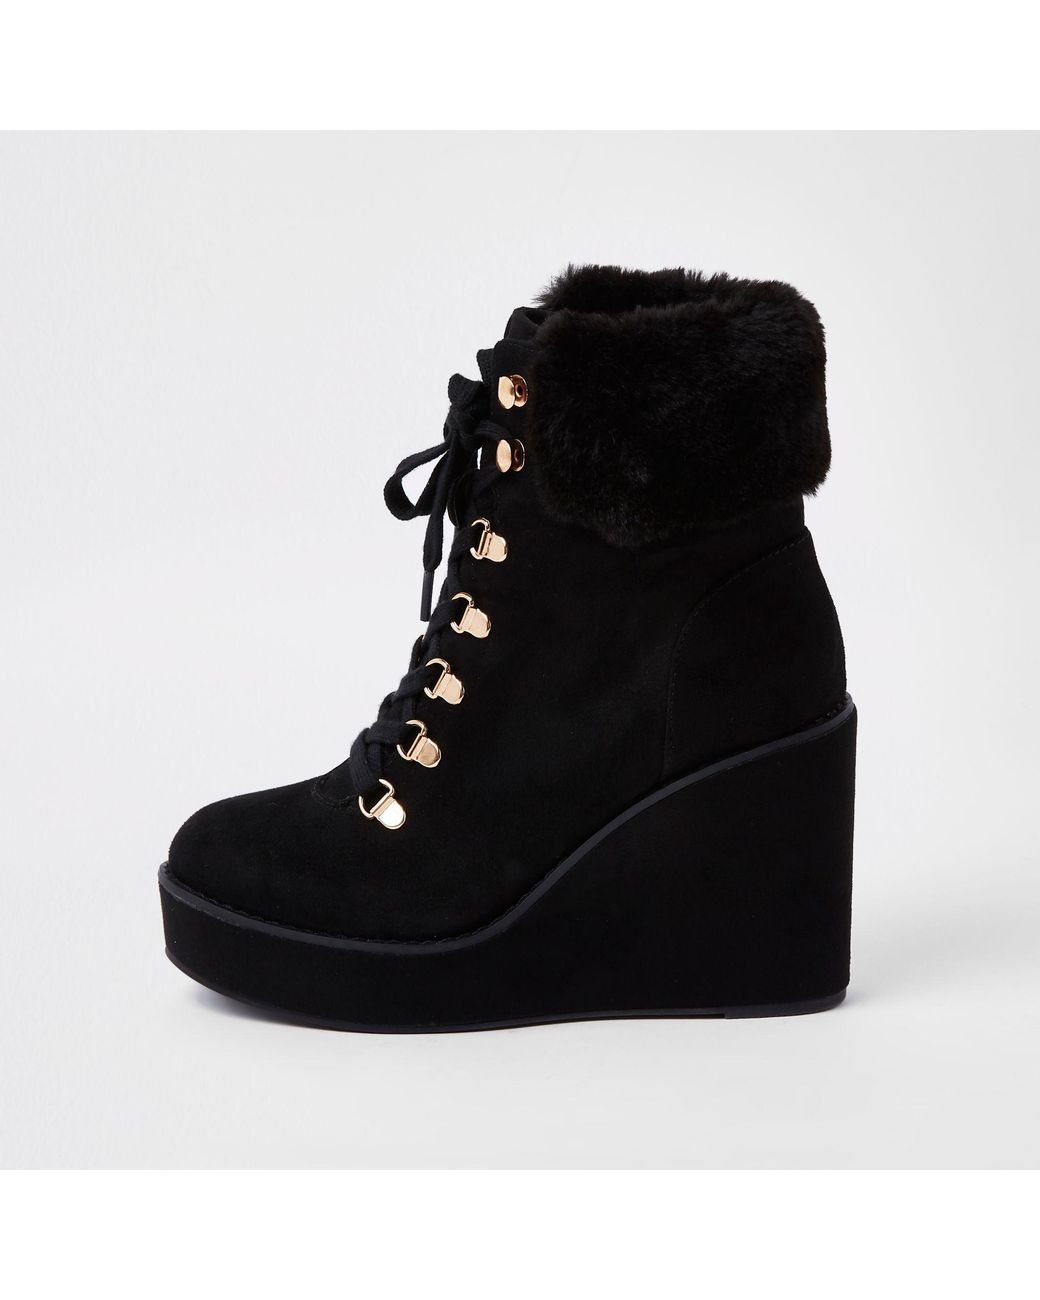 River Island Black Lace-up Wedge Heel Boots | Lyst